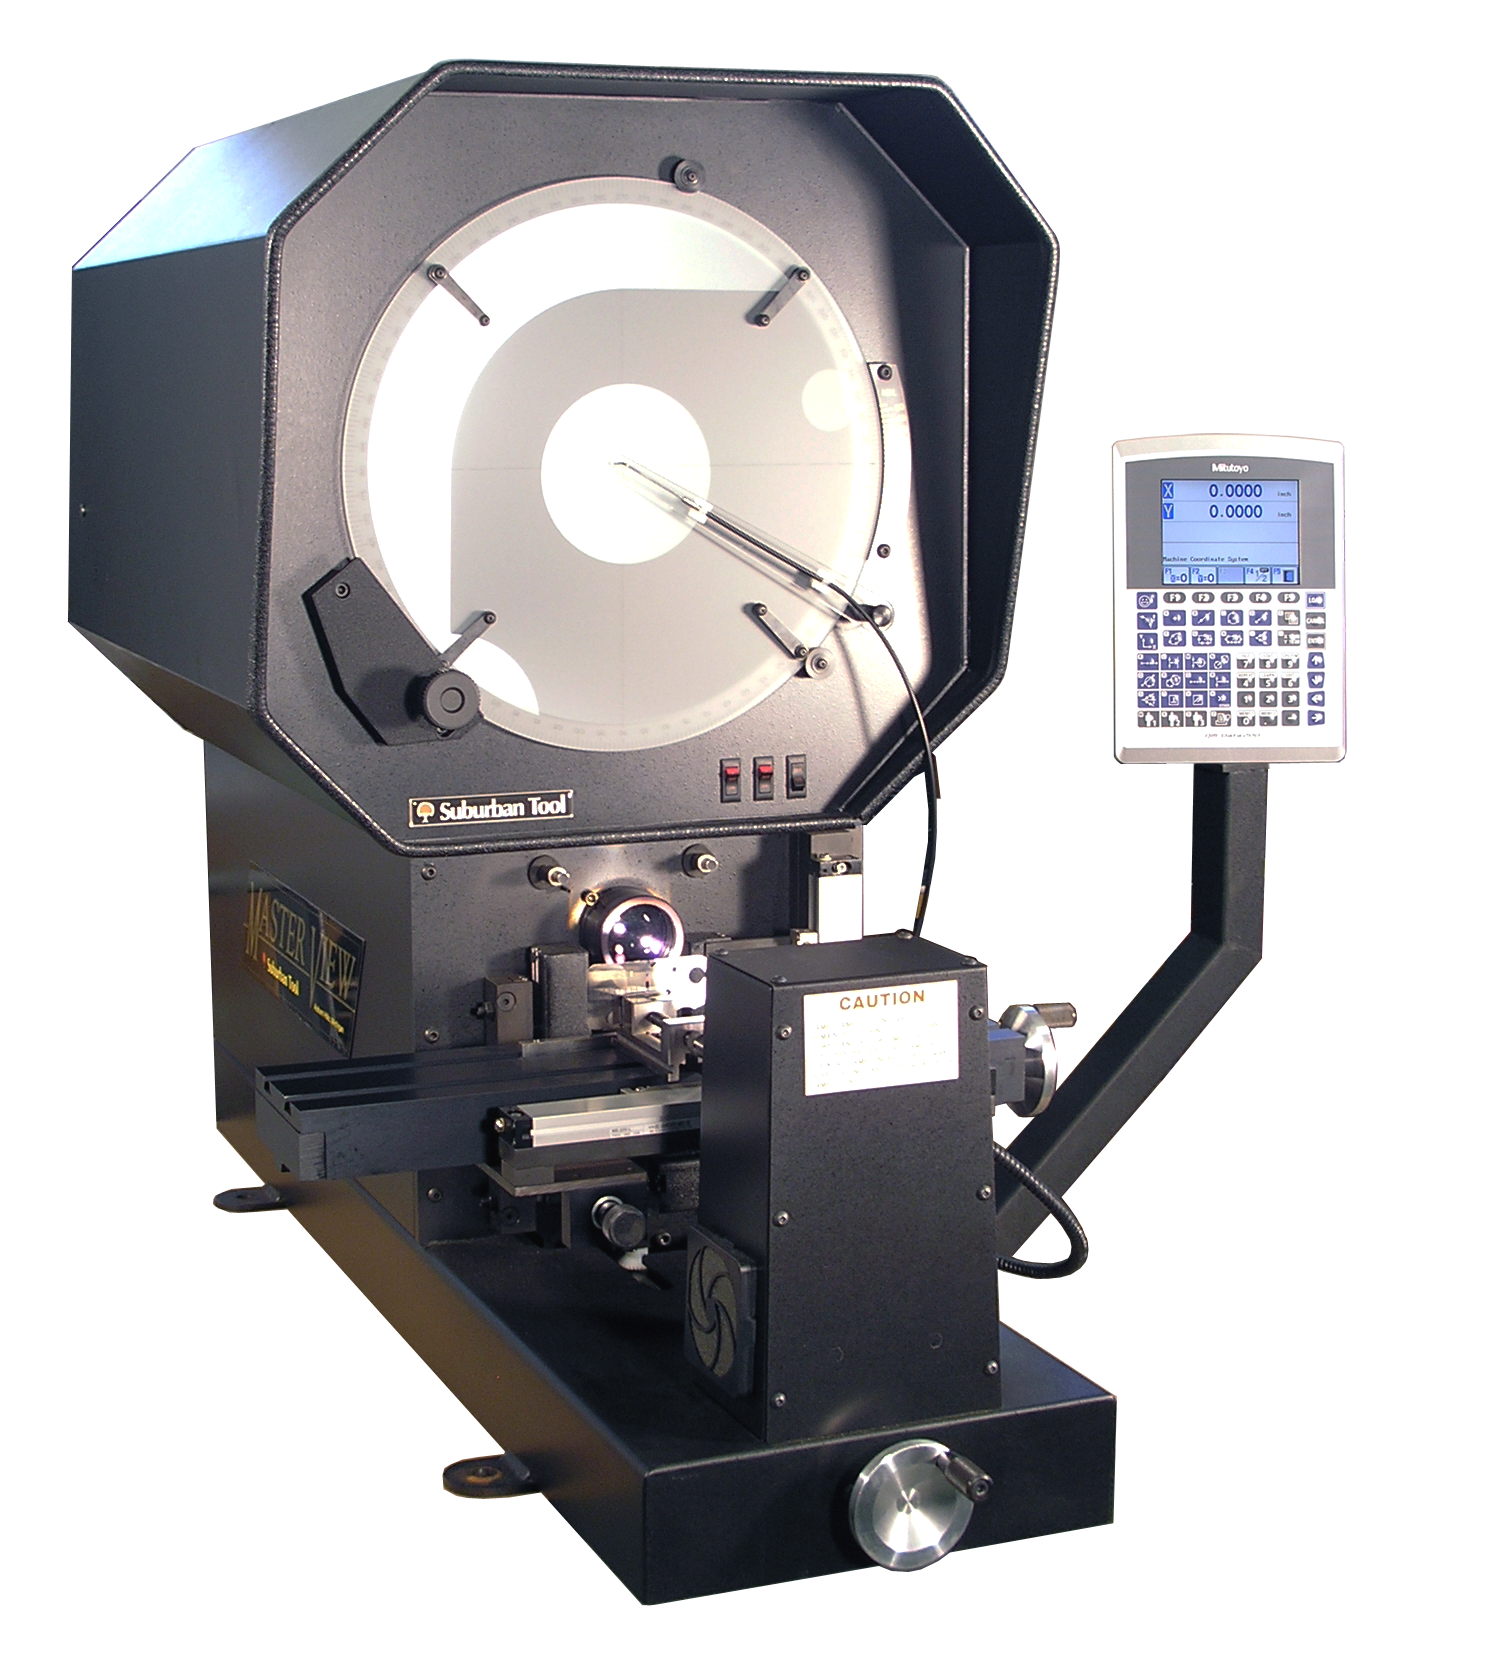 MV-140 Master-View 14" Optical Comparator with Erect Image